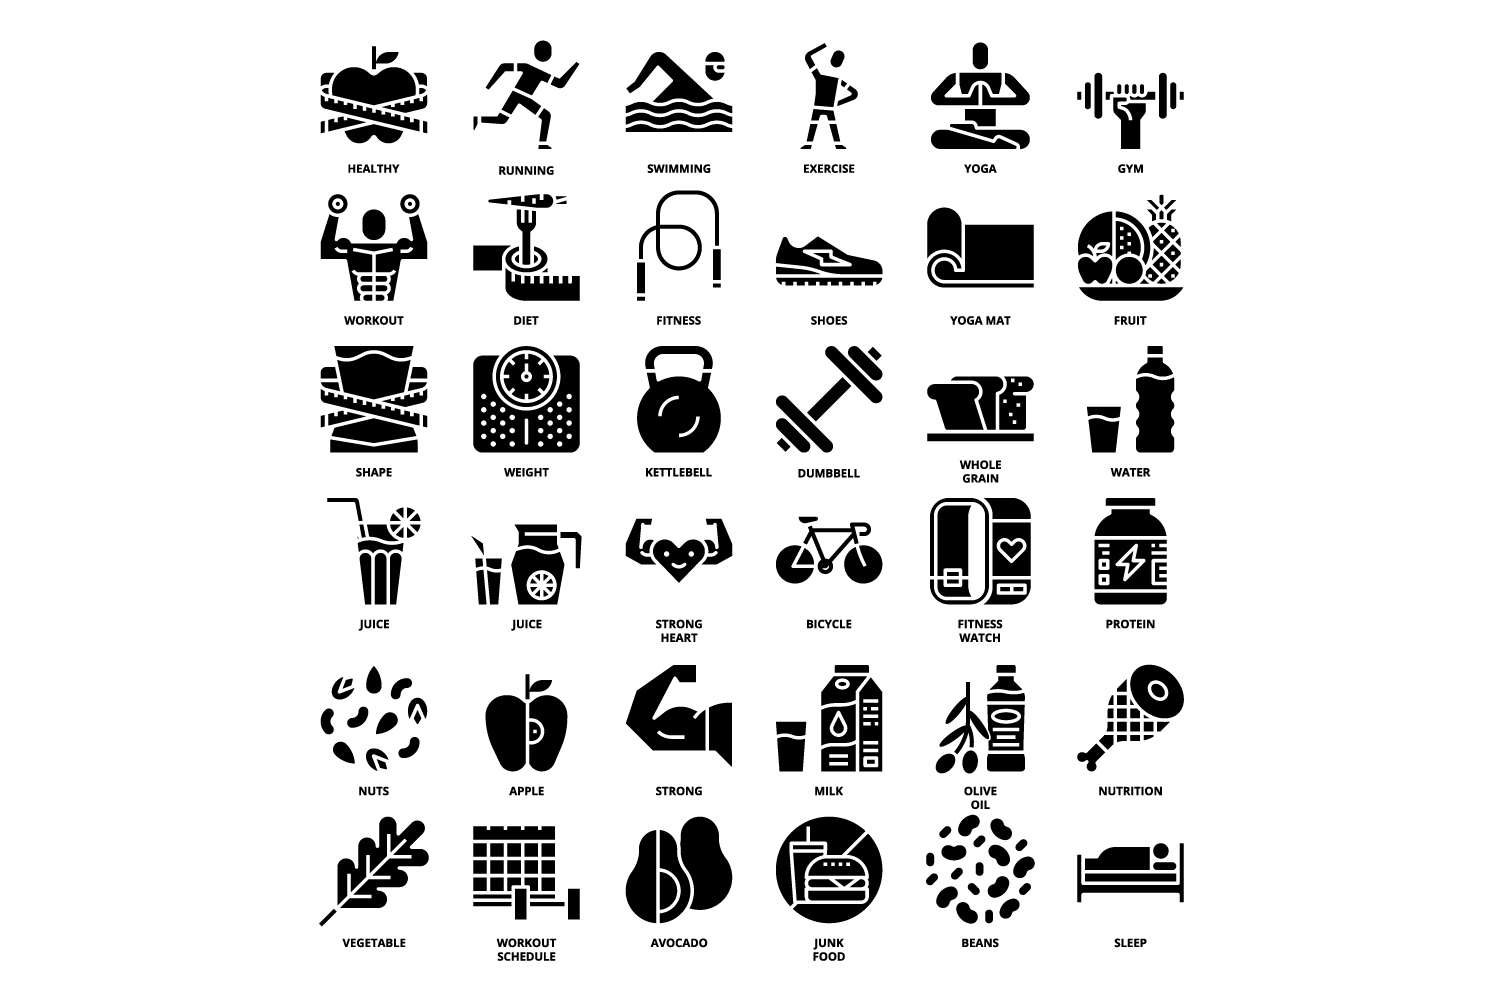 Black and white image of various symbols.